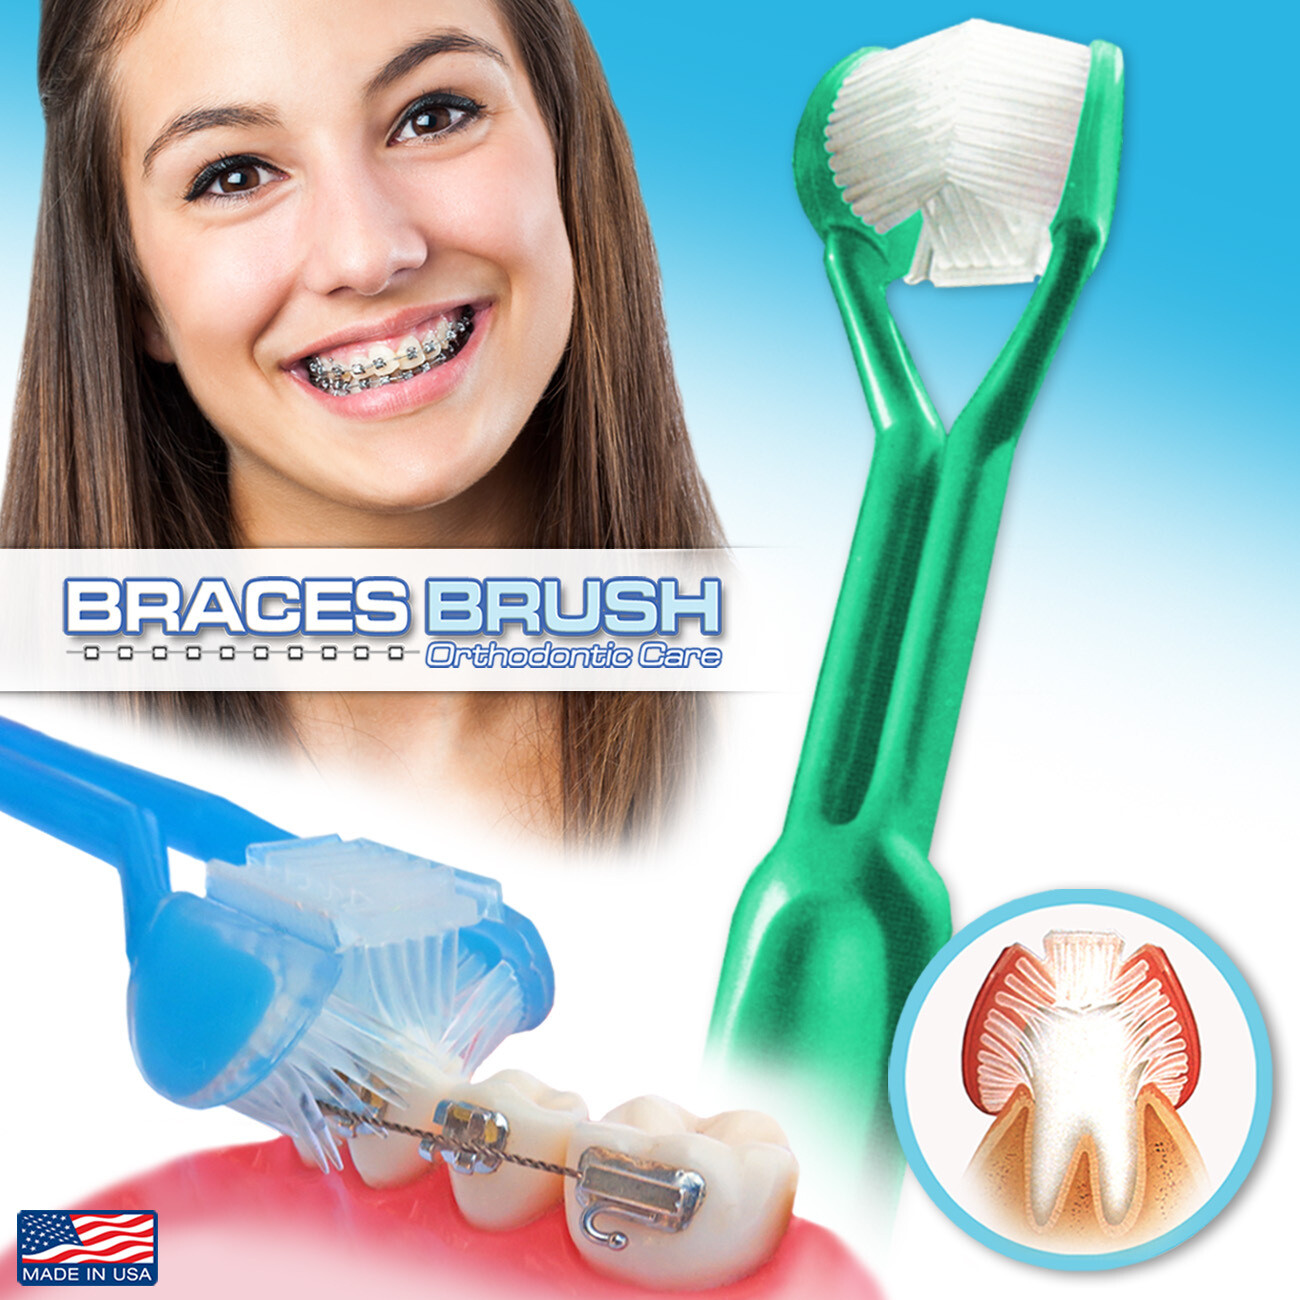 DenTrust 3-Sided Braces Brush | The Only Toothbrush Clinically Proven to Remove More Plaque Around Bracket's & Orthodontic's | Tongue Scraper for Fresh Breath | MADE IN USA